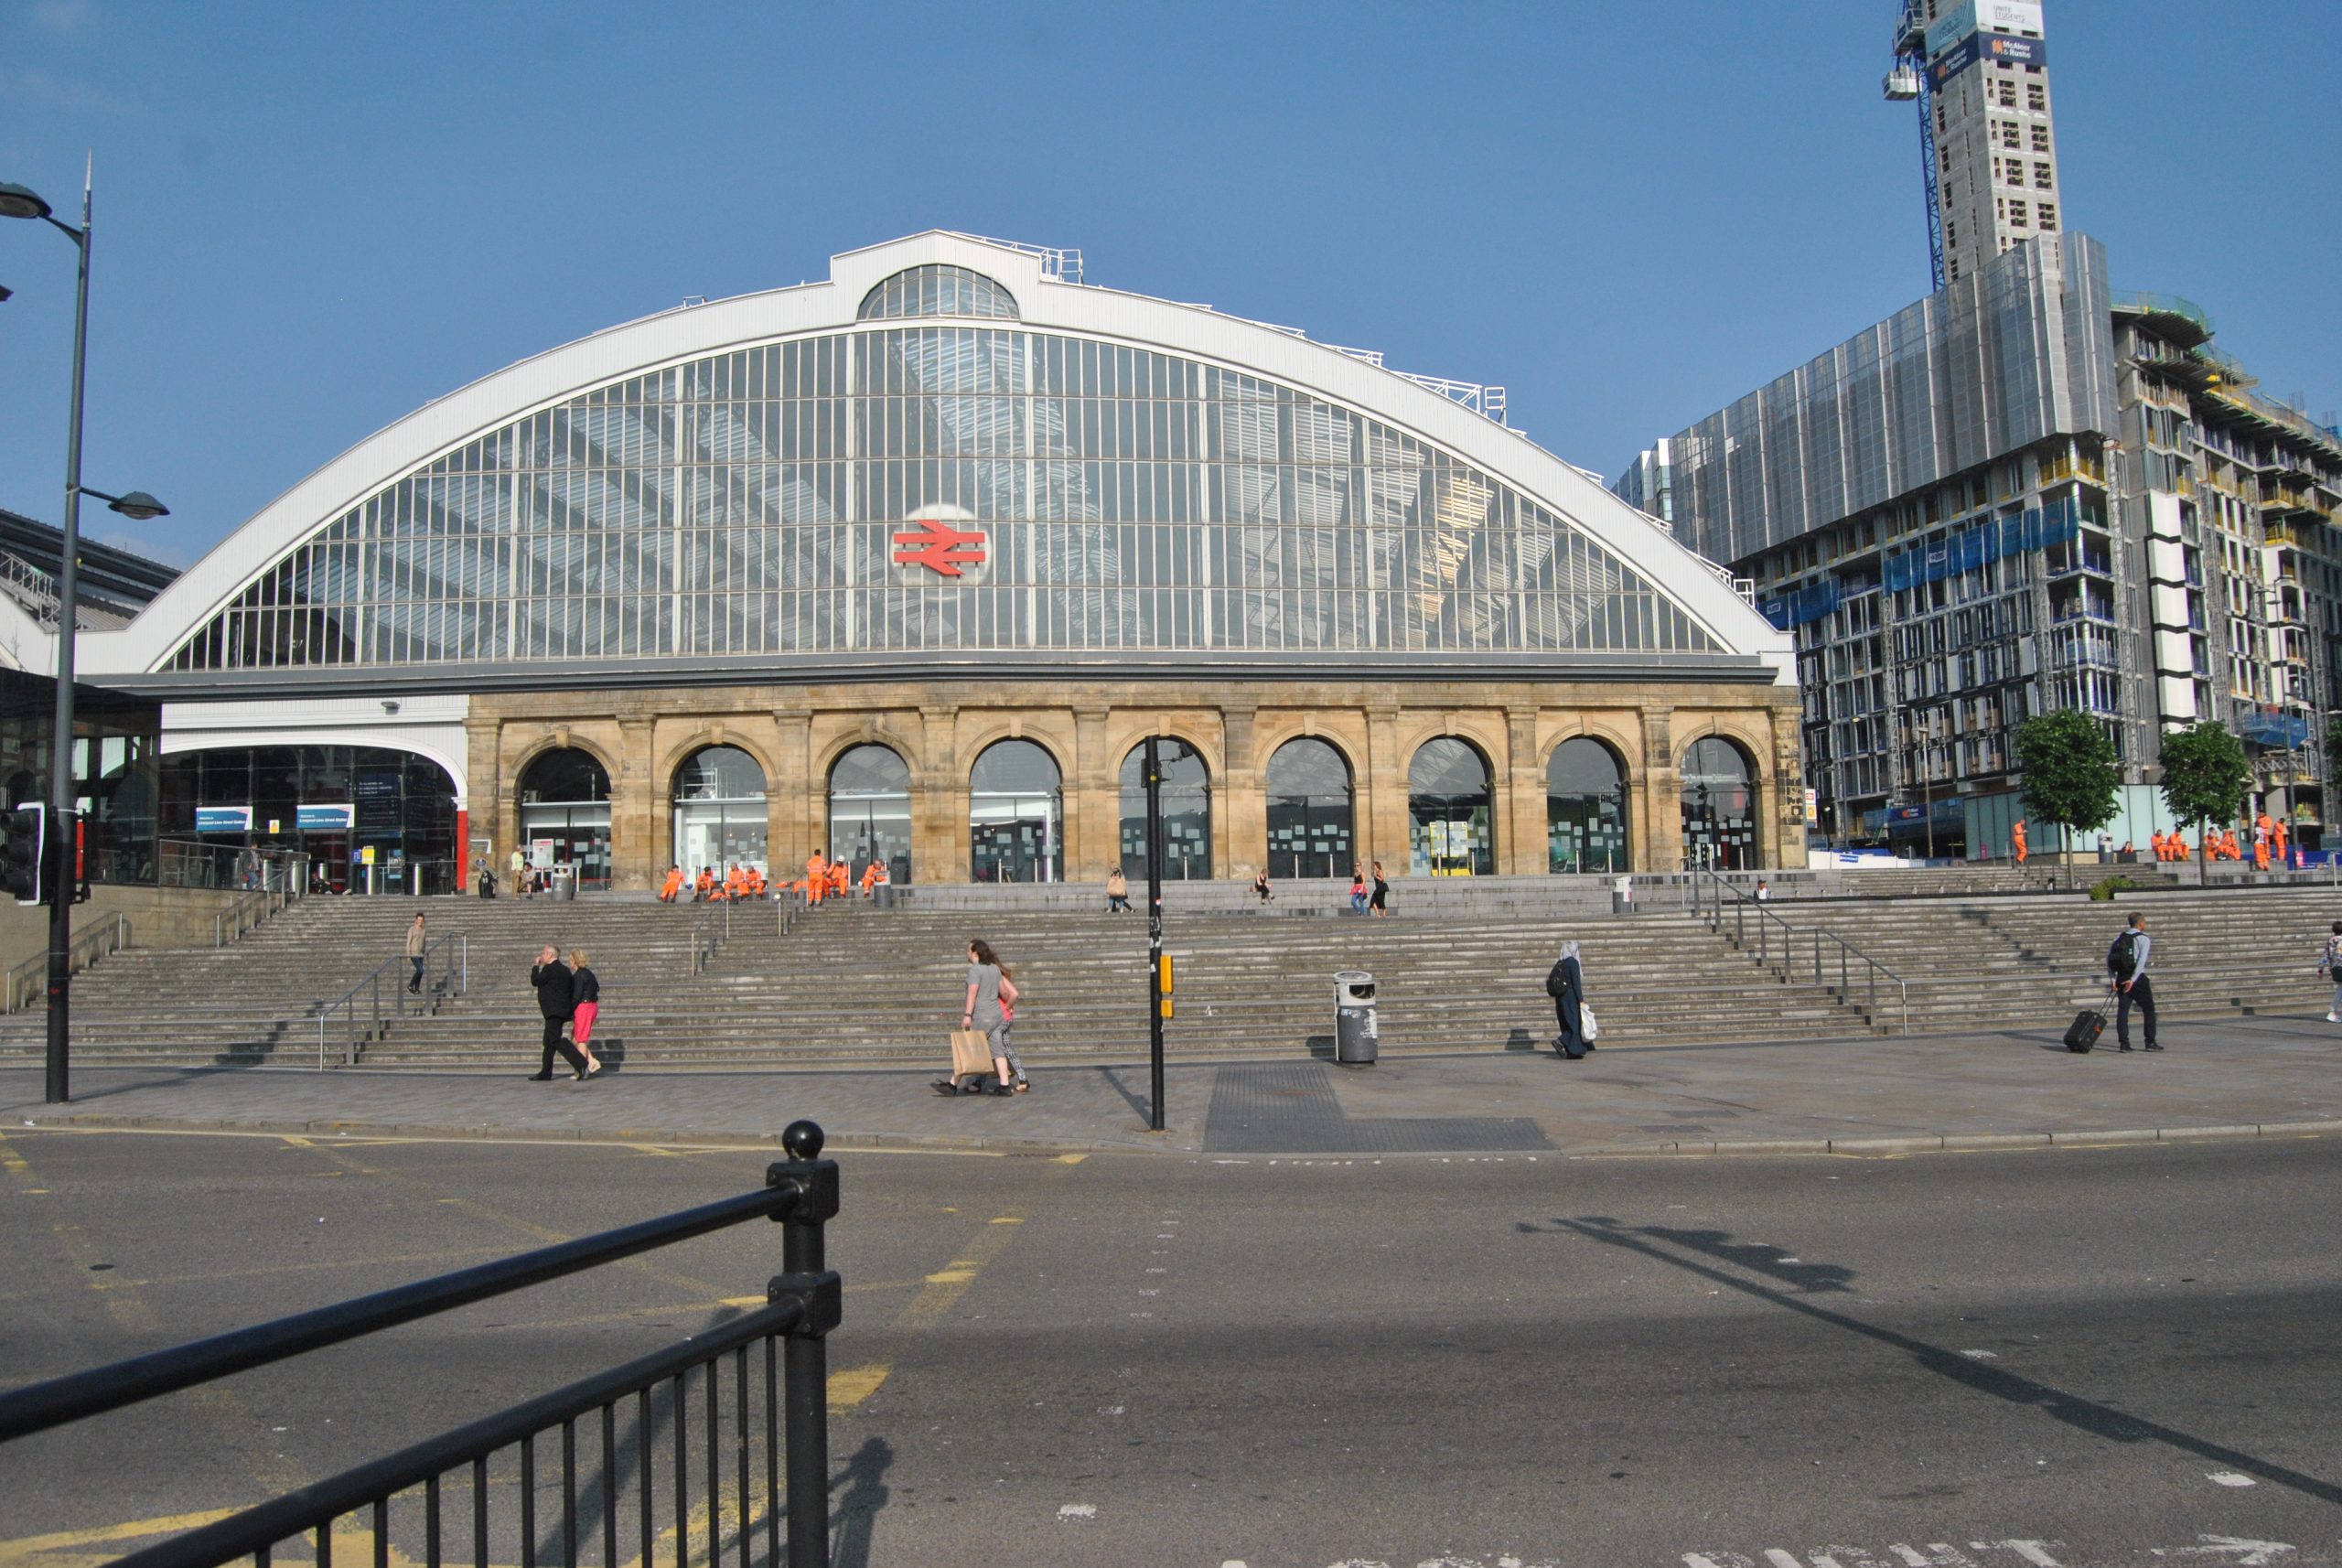 The front of Liverpool Lime Street Station : 
Image credit - John Cashen